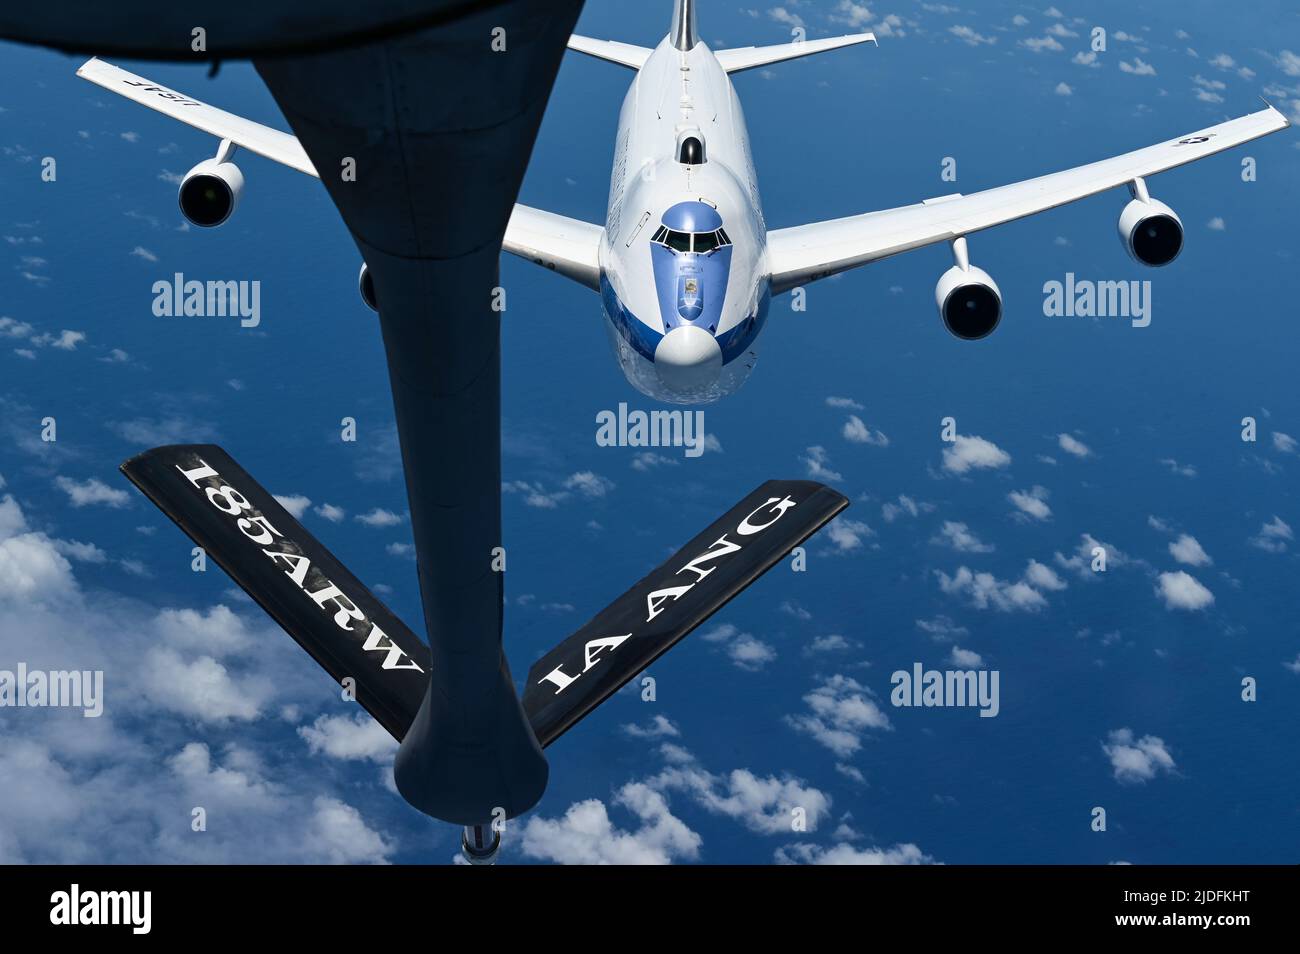 Secretary of Defense Lloyd J. Austin III's U.S. Air Force E-4B aircraft is refueled by KC-135 Stratotankers, assigned to the 50th Expeditionary Air Refueling squadron and the 340th Expeditionary Air Refueling squadron within the CENTCOM area of responsibility.(U.S. Air Force photo by Staff Sgt. Ashley Sokolov) Stock Photo